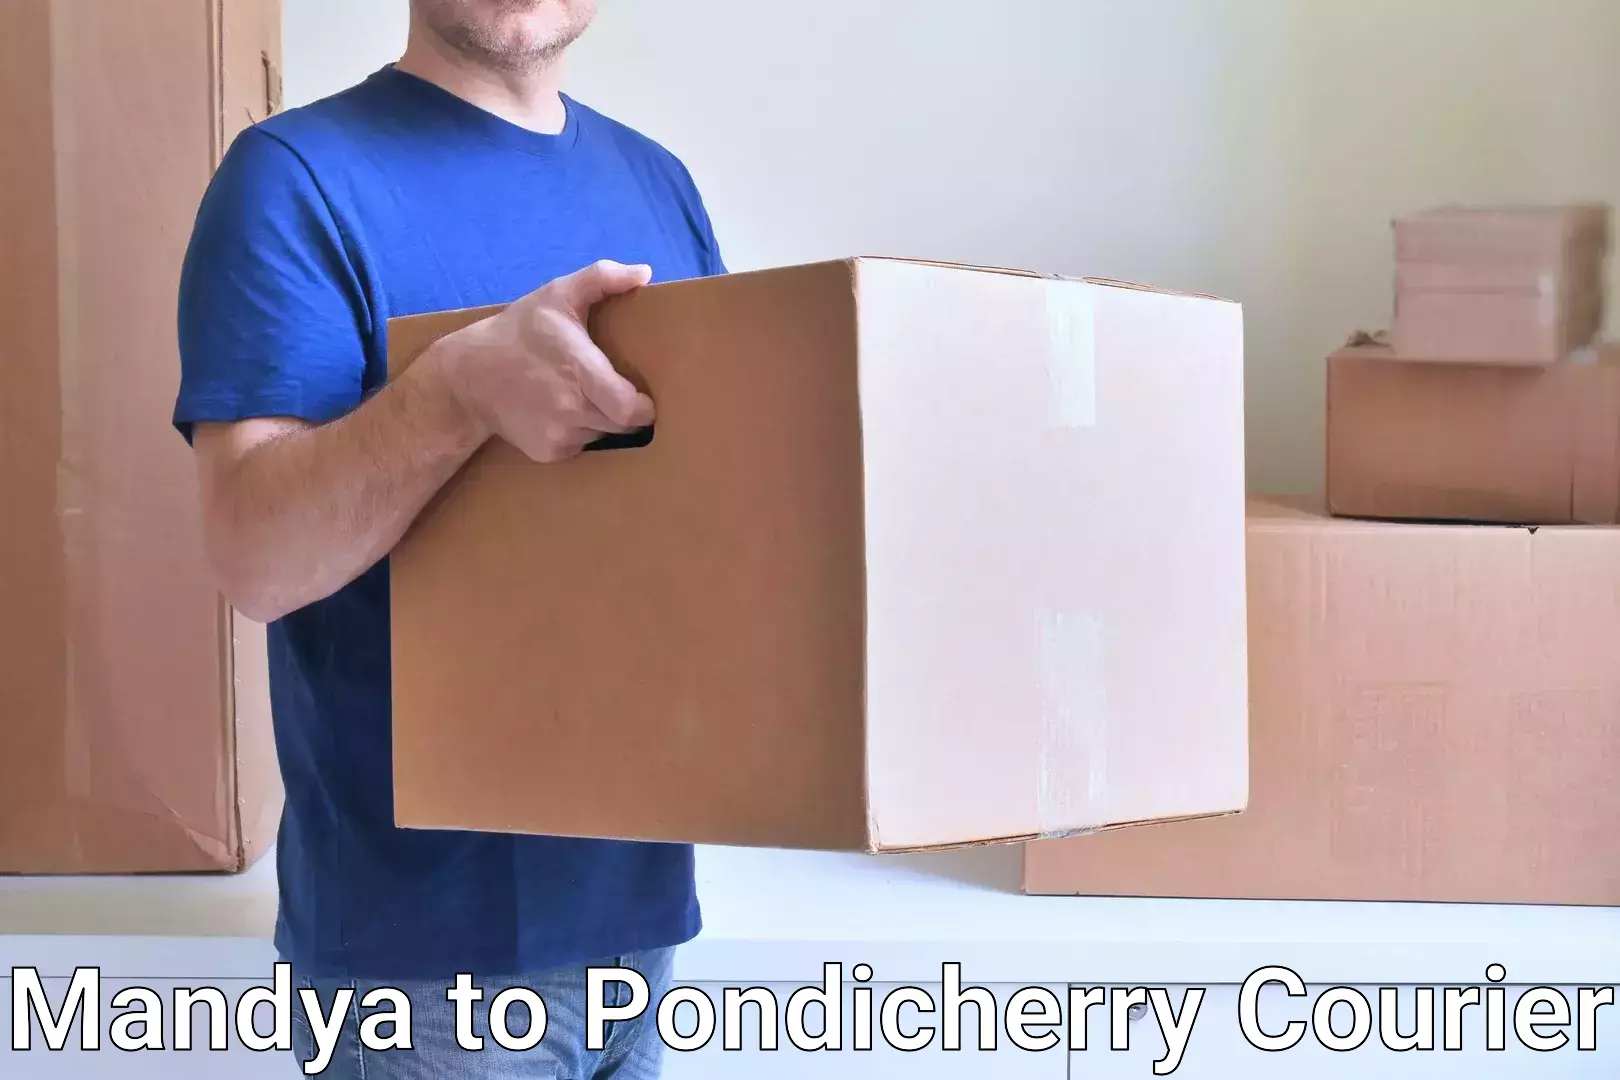 Automated parcel services Mandya to Metttupalayam